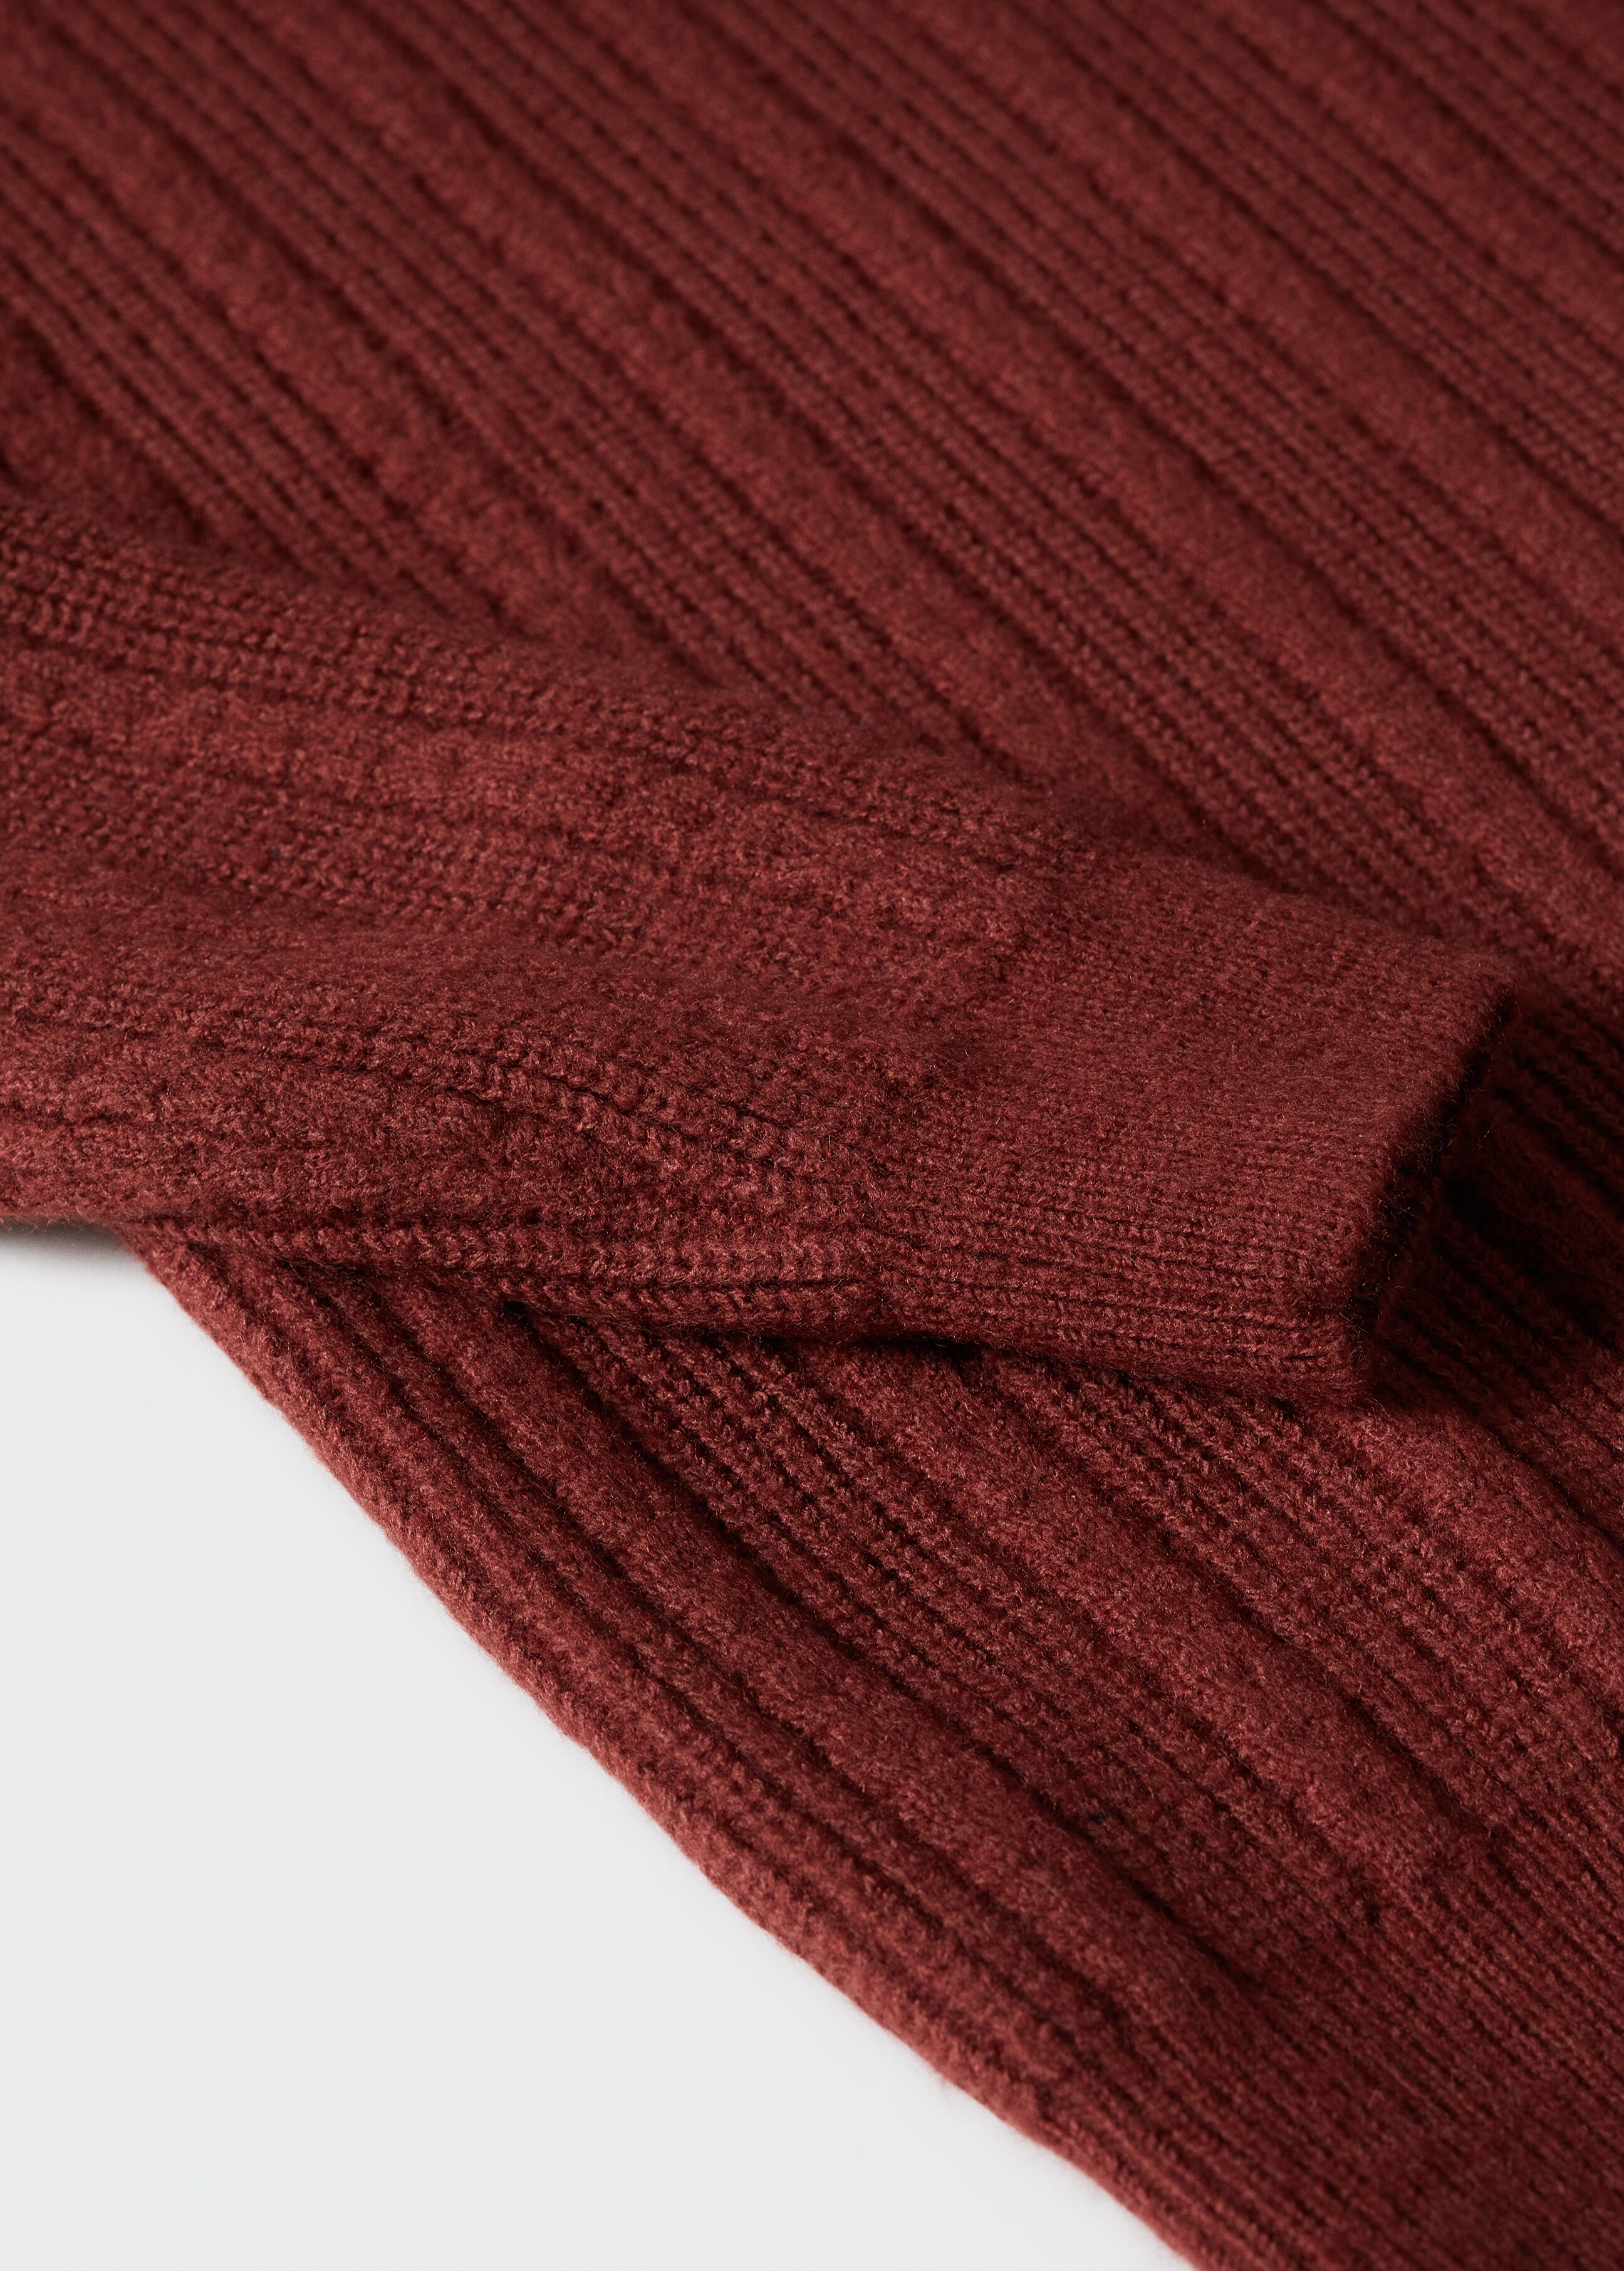 Structured turtleneck sweater - Details of the article 8